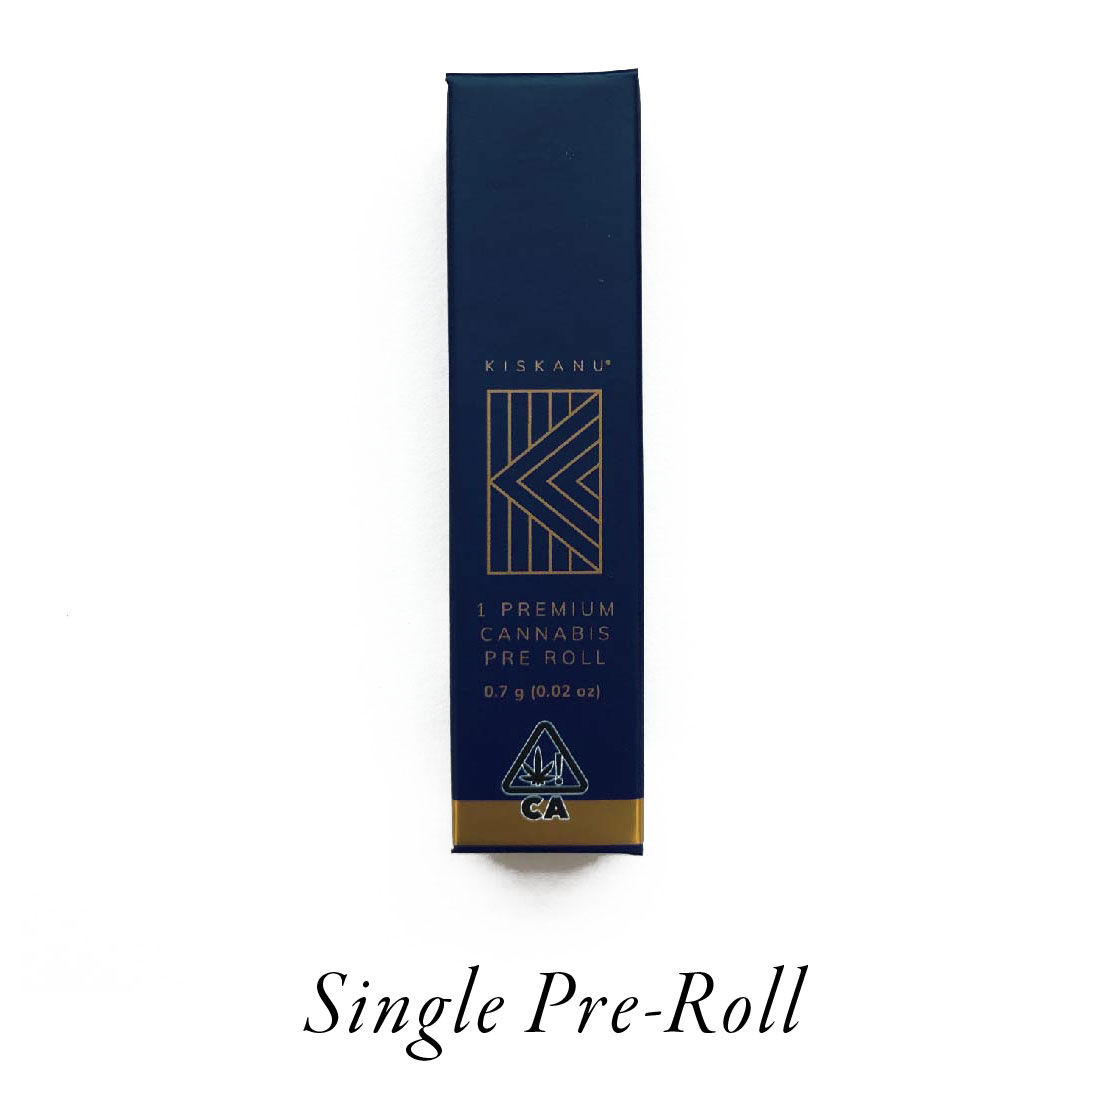 PRODUCT GRAPHIC - SINGLE PRE-ROLL